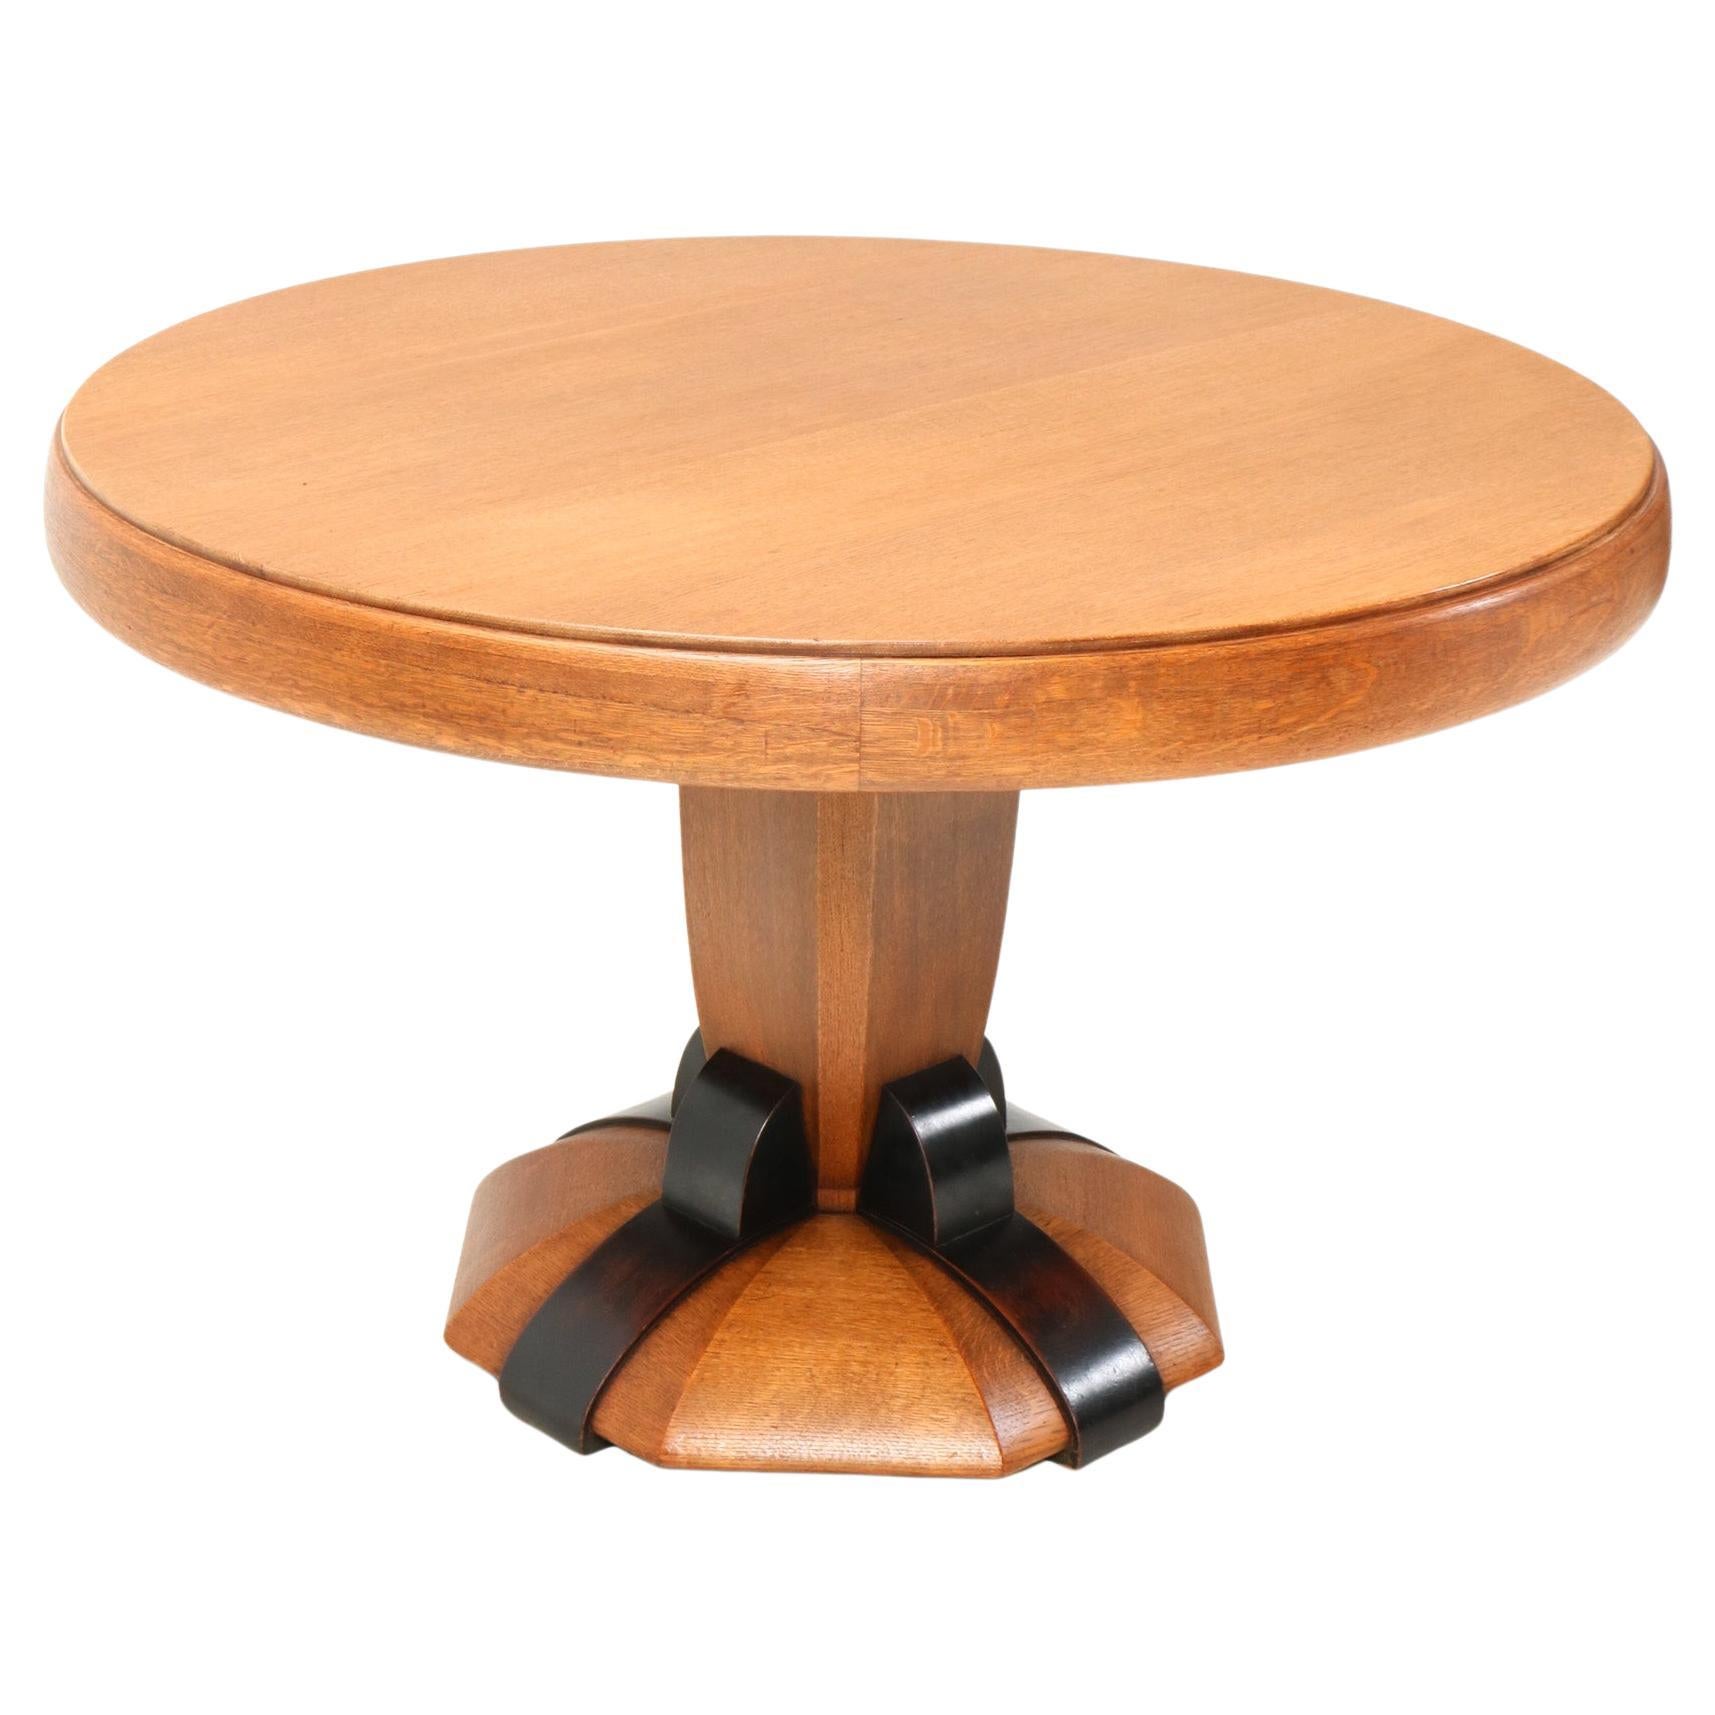  Art Deco Amsterdamse School Oak Dining Room Table by Paul Bromberg for Pander For Sale